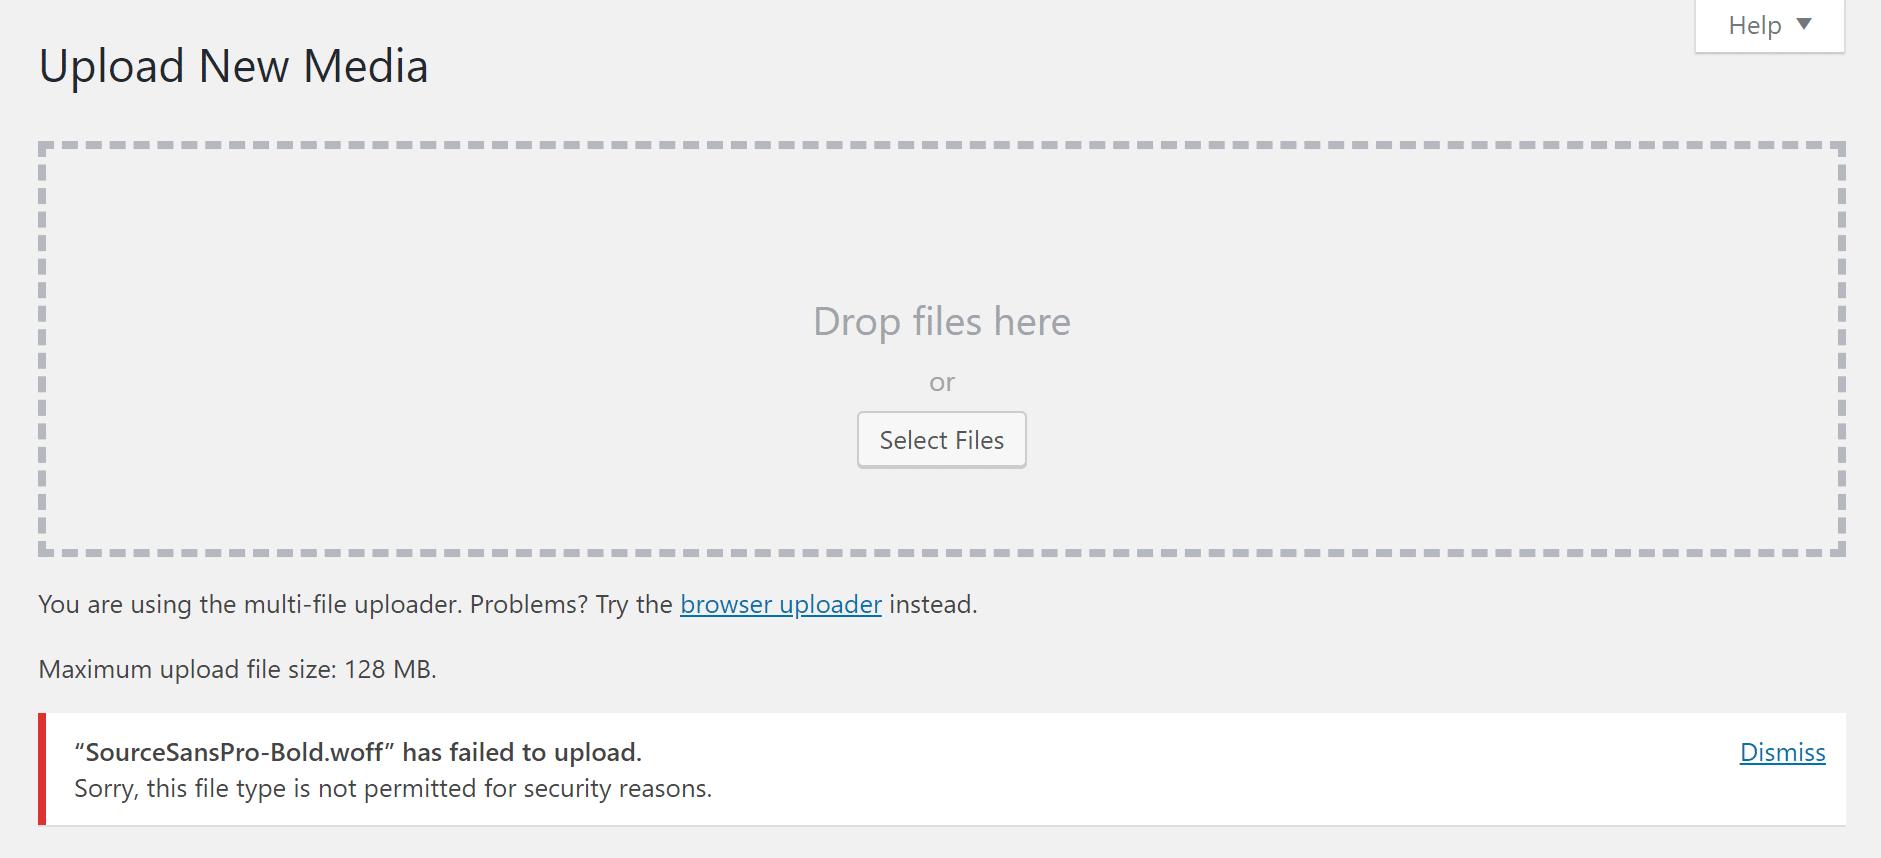 Uploading a .woff file triggers the message